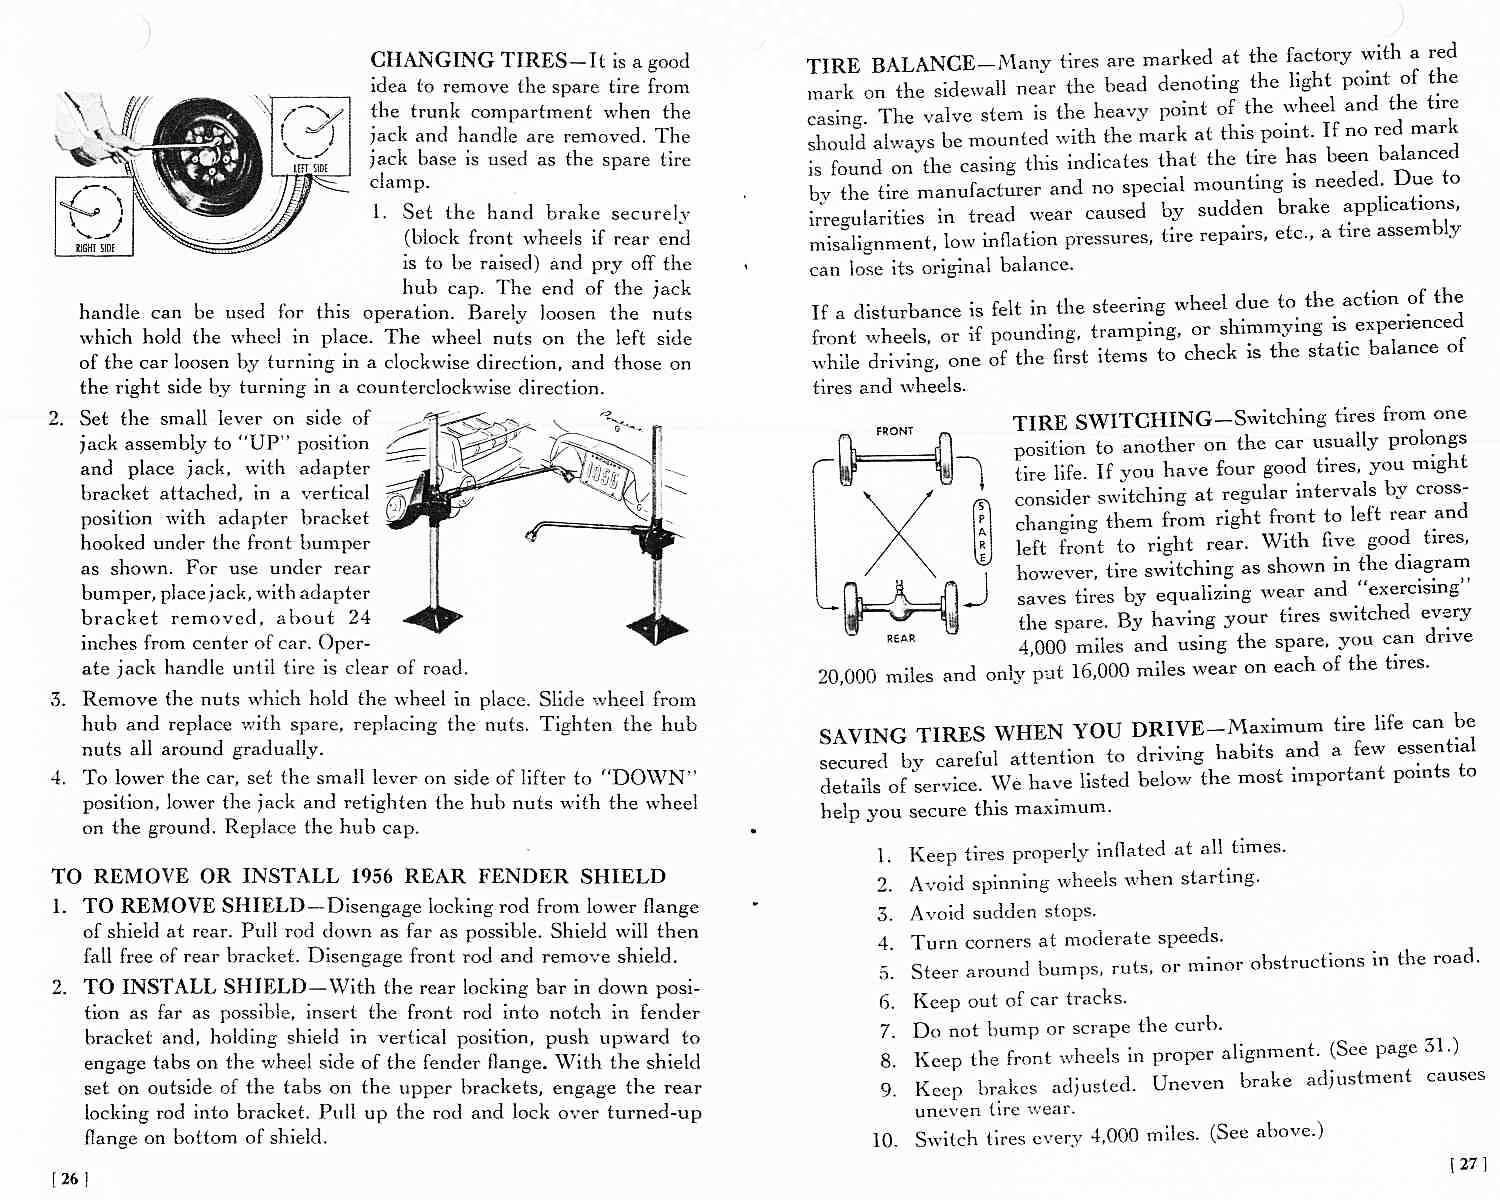 1956_Pontiac_Owners_Guide-26-27